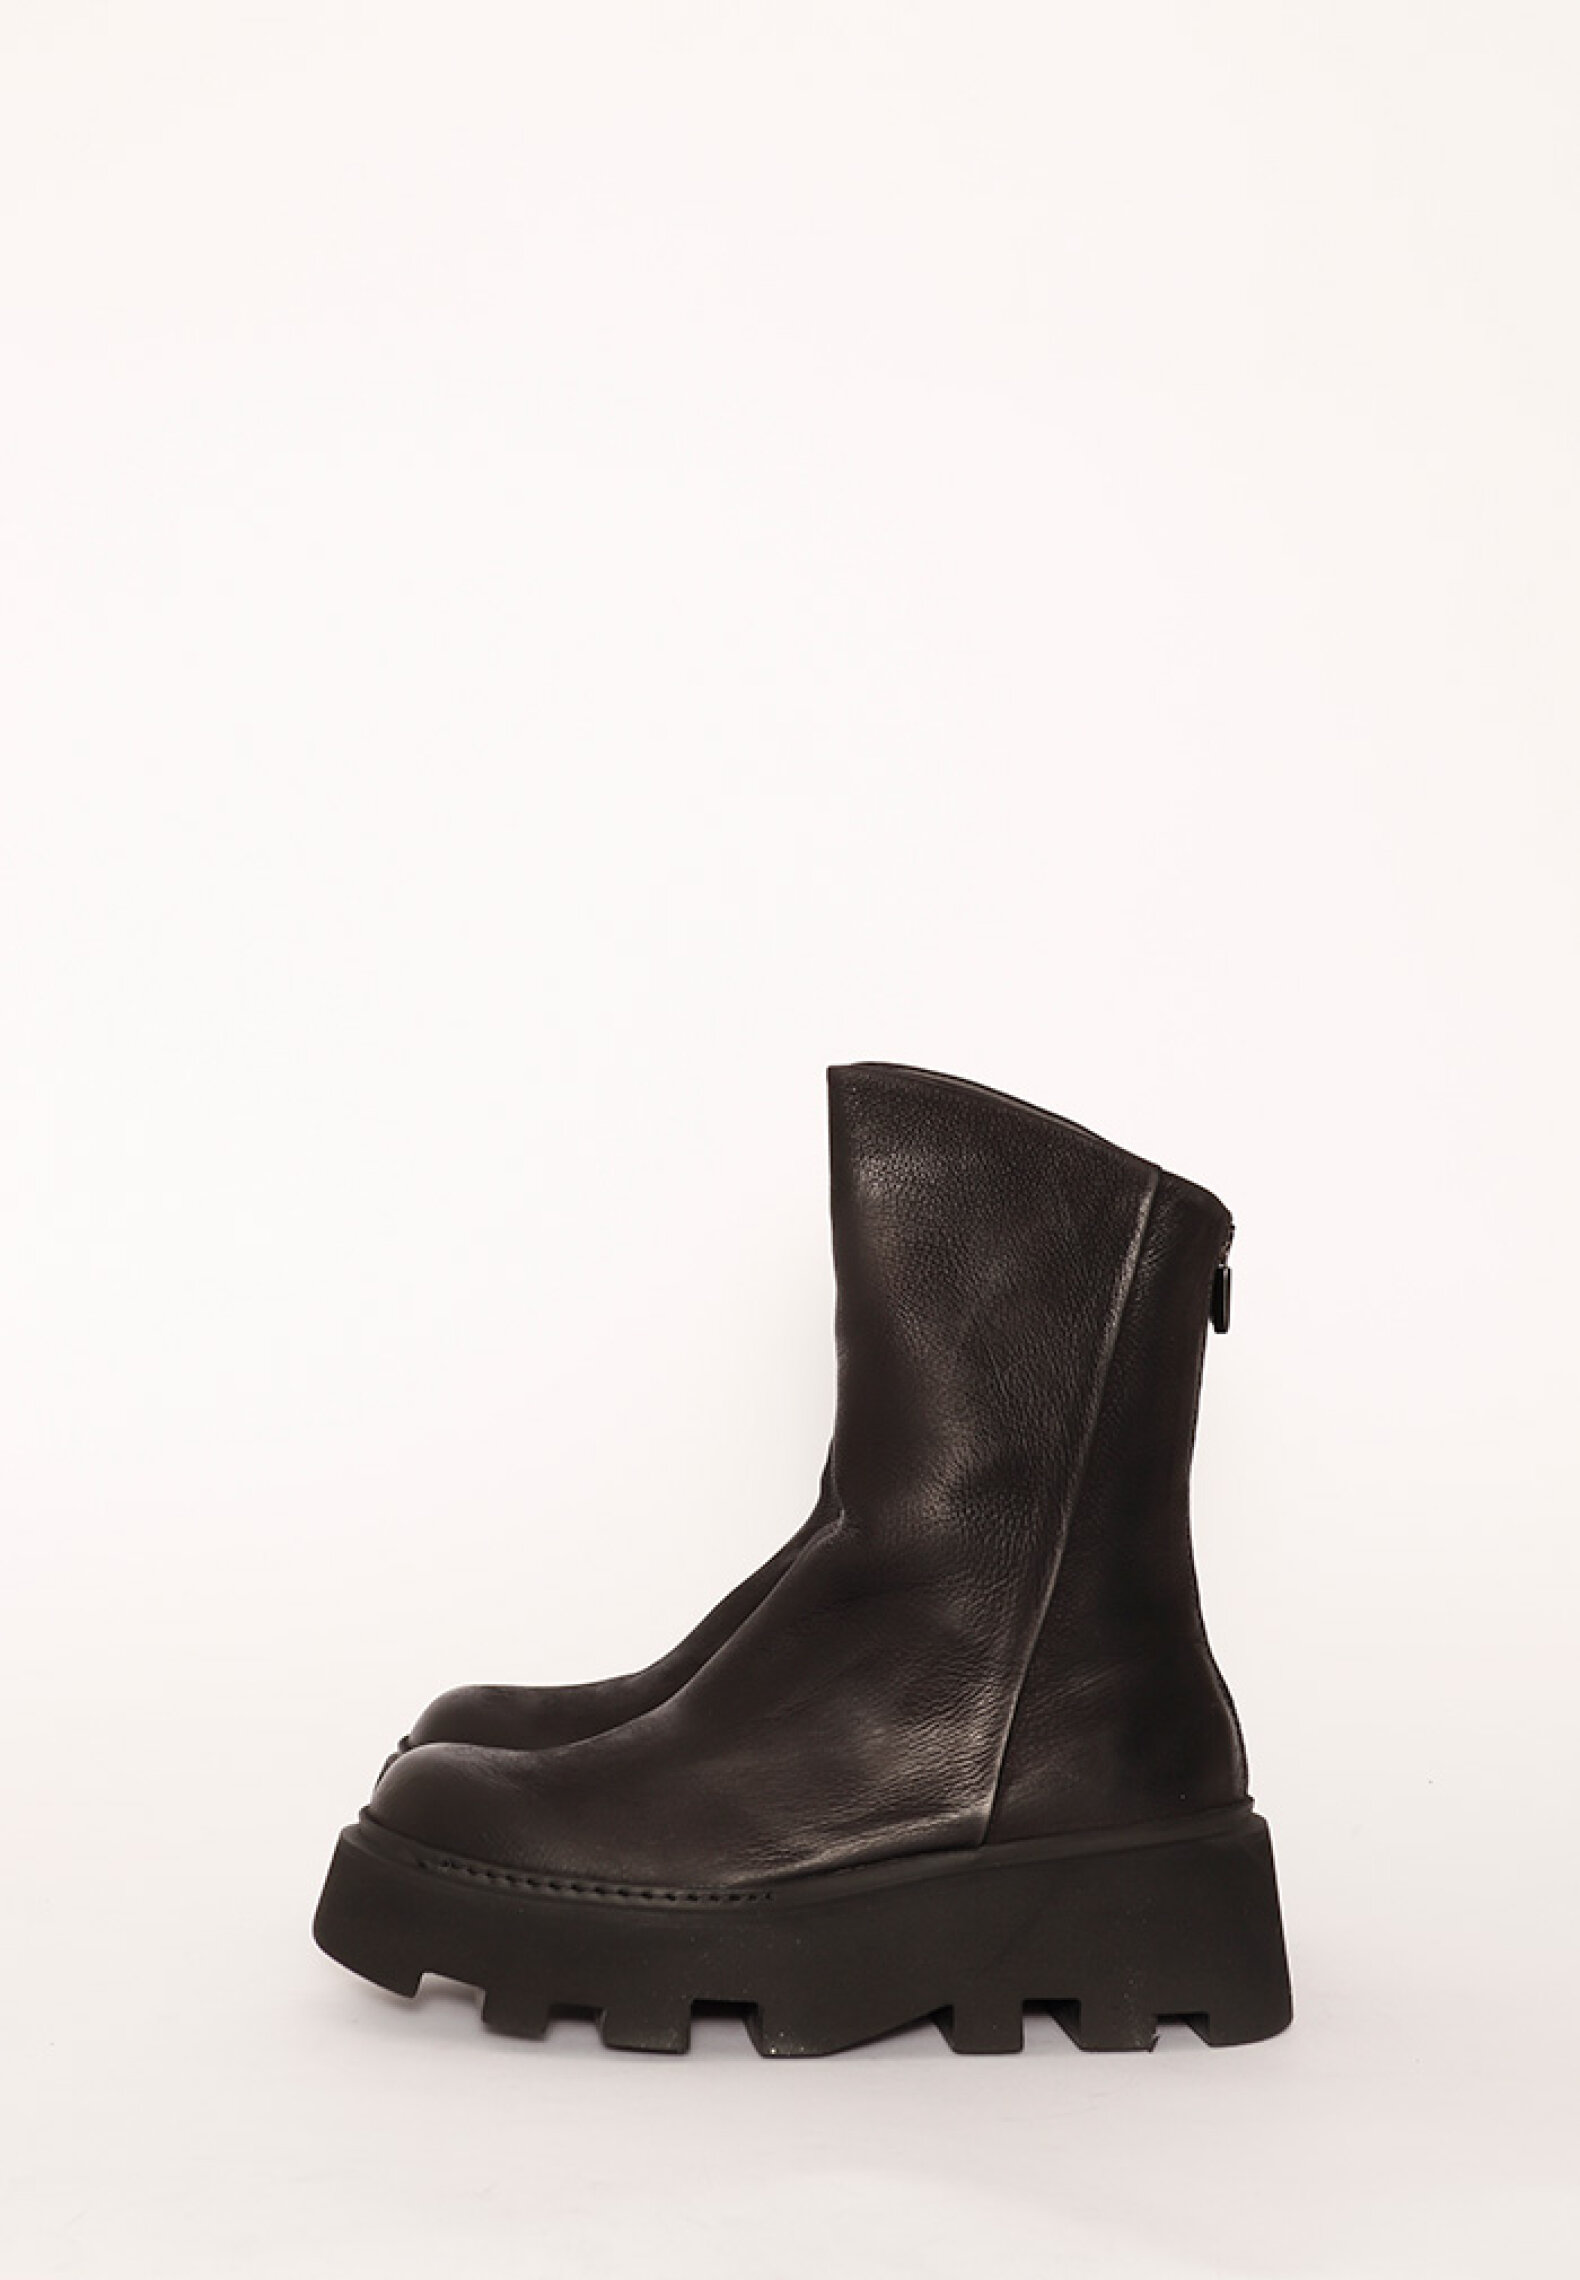 Lofina boot with a chunky sole and zipper